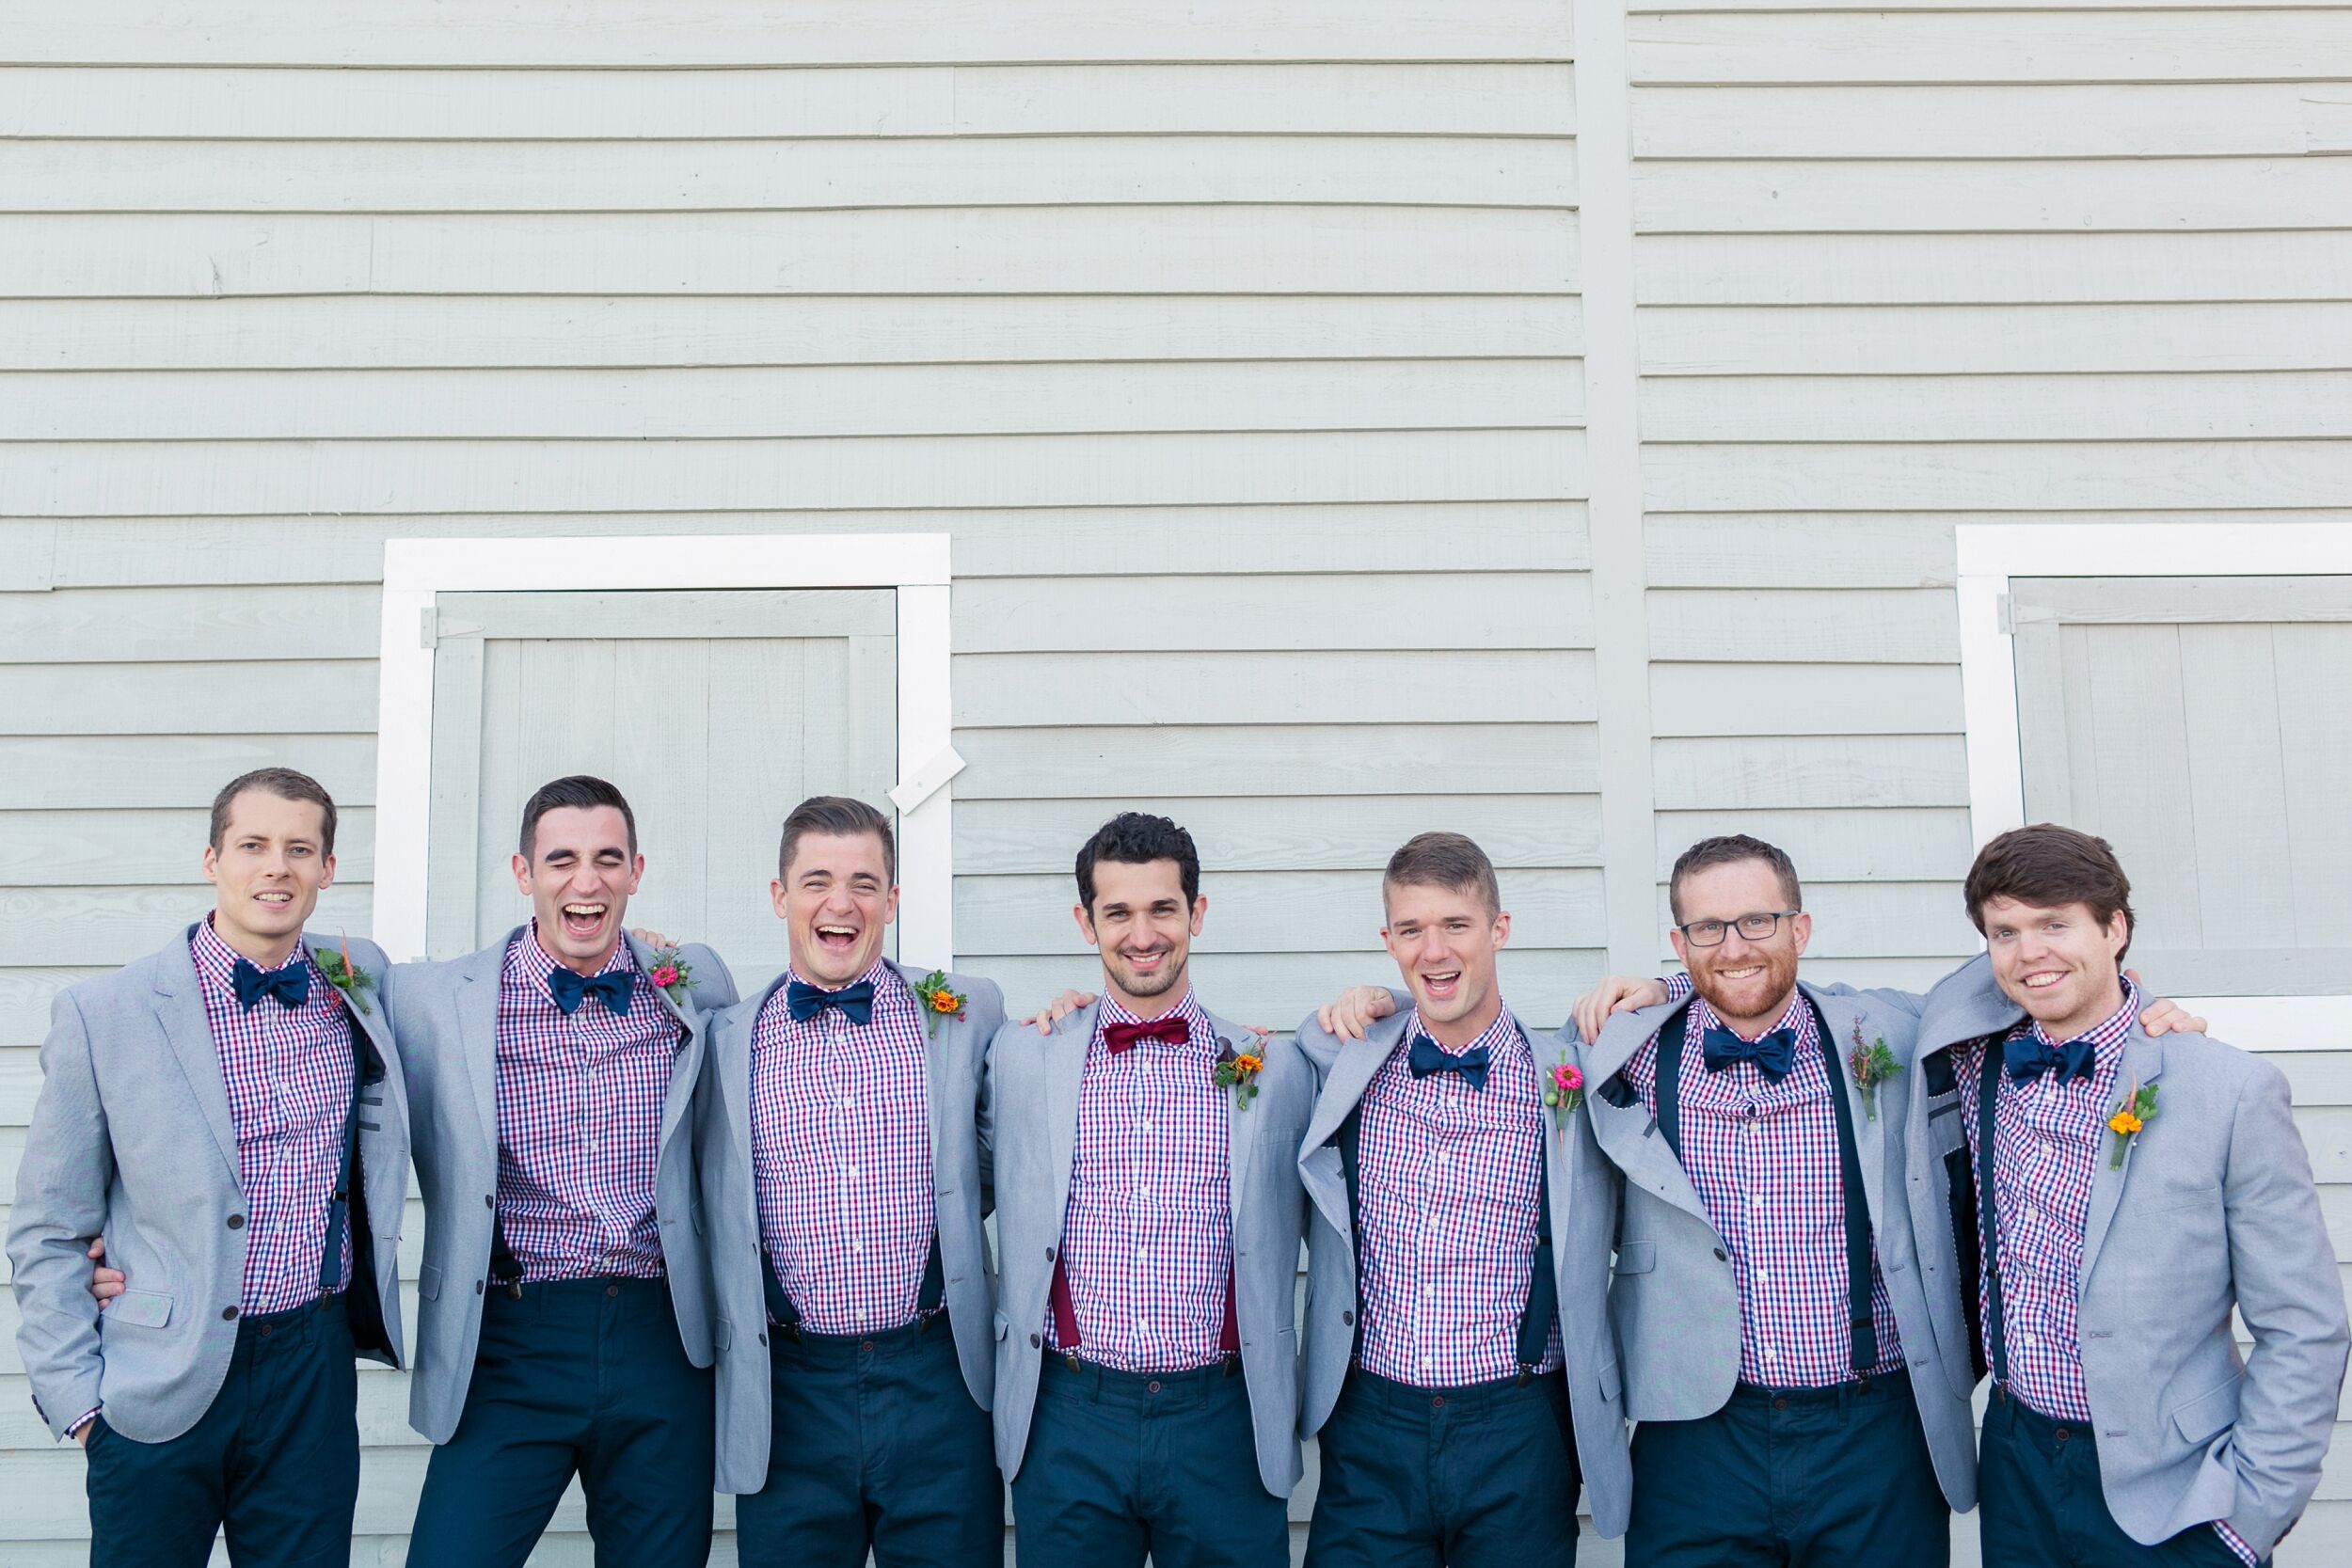 Groomsmen and Groom in Checkered Shirts, Bow Ties and Suspenders